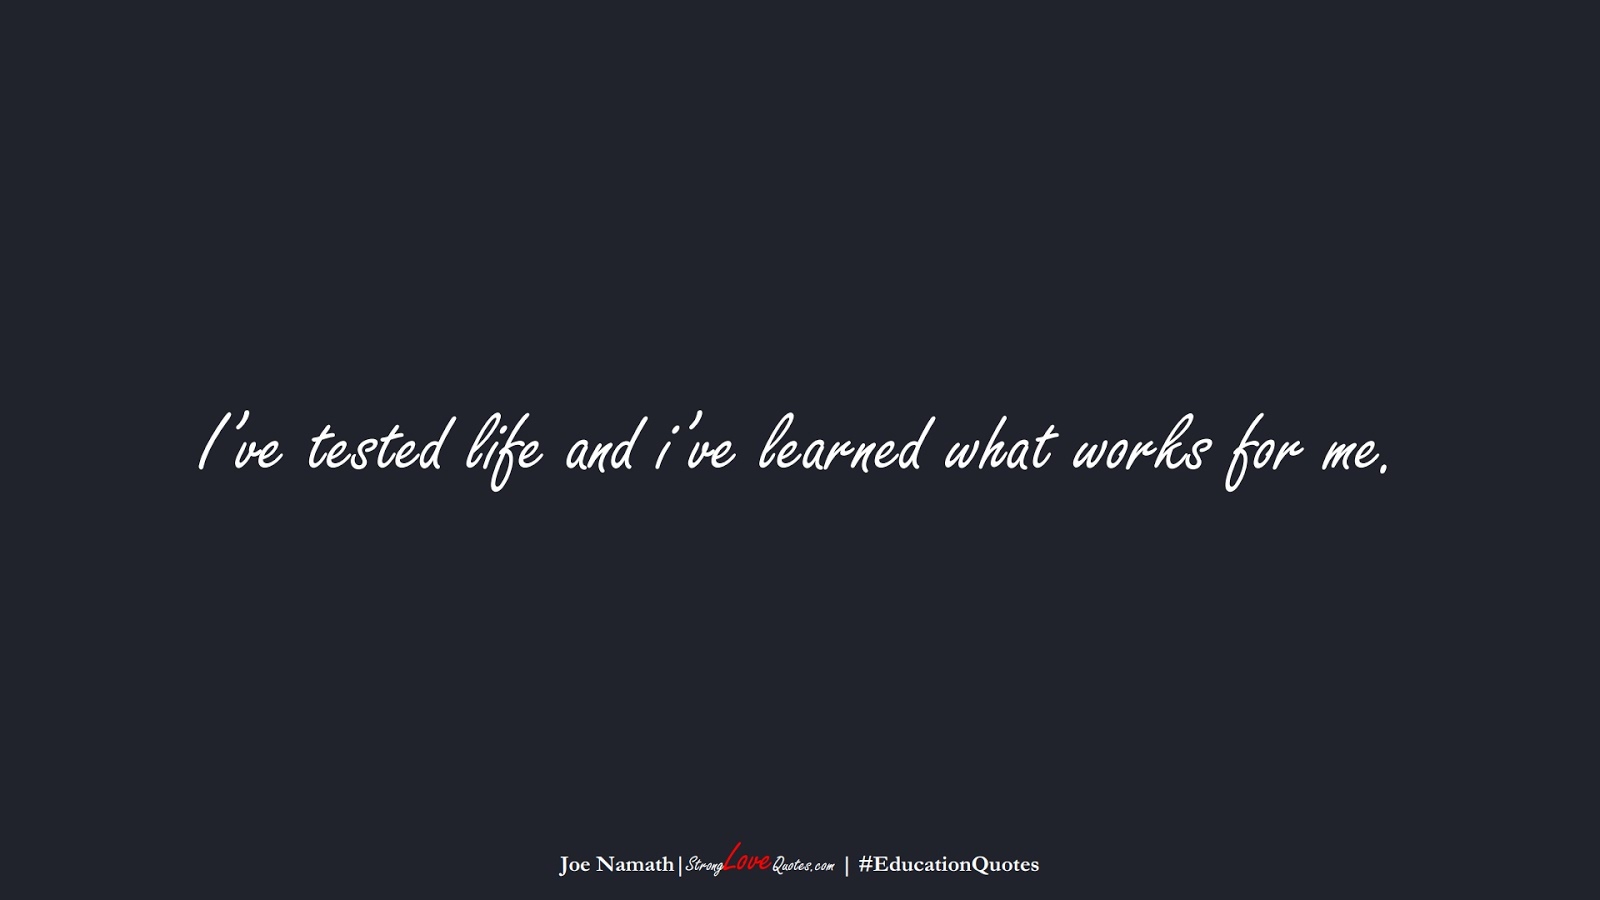 I’ve tested life and i’ve learned what works for me. (Joe Namath);  #EducationQuotes